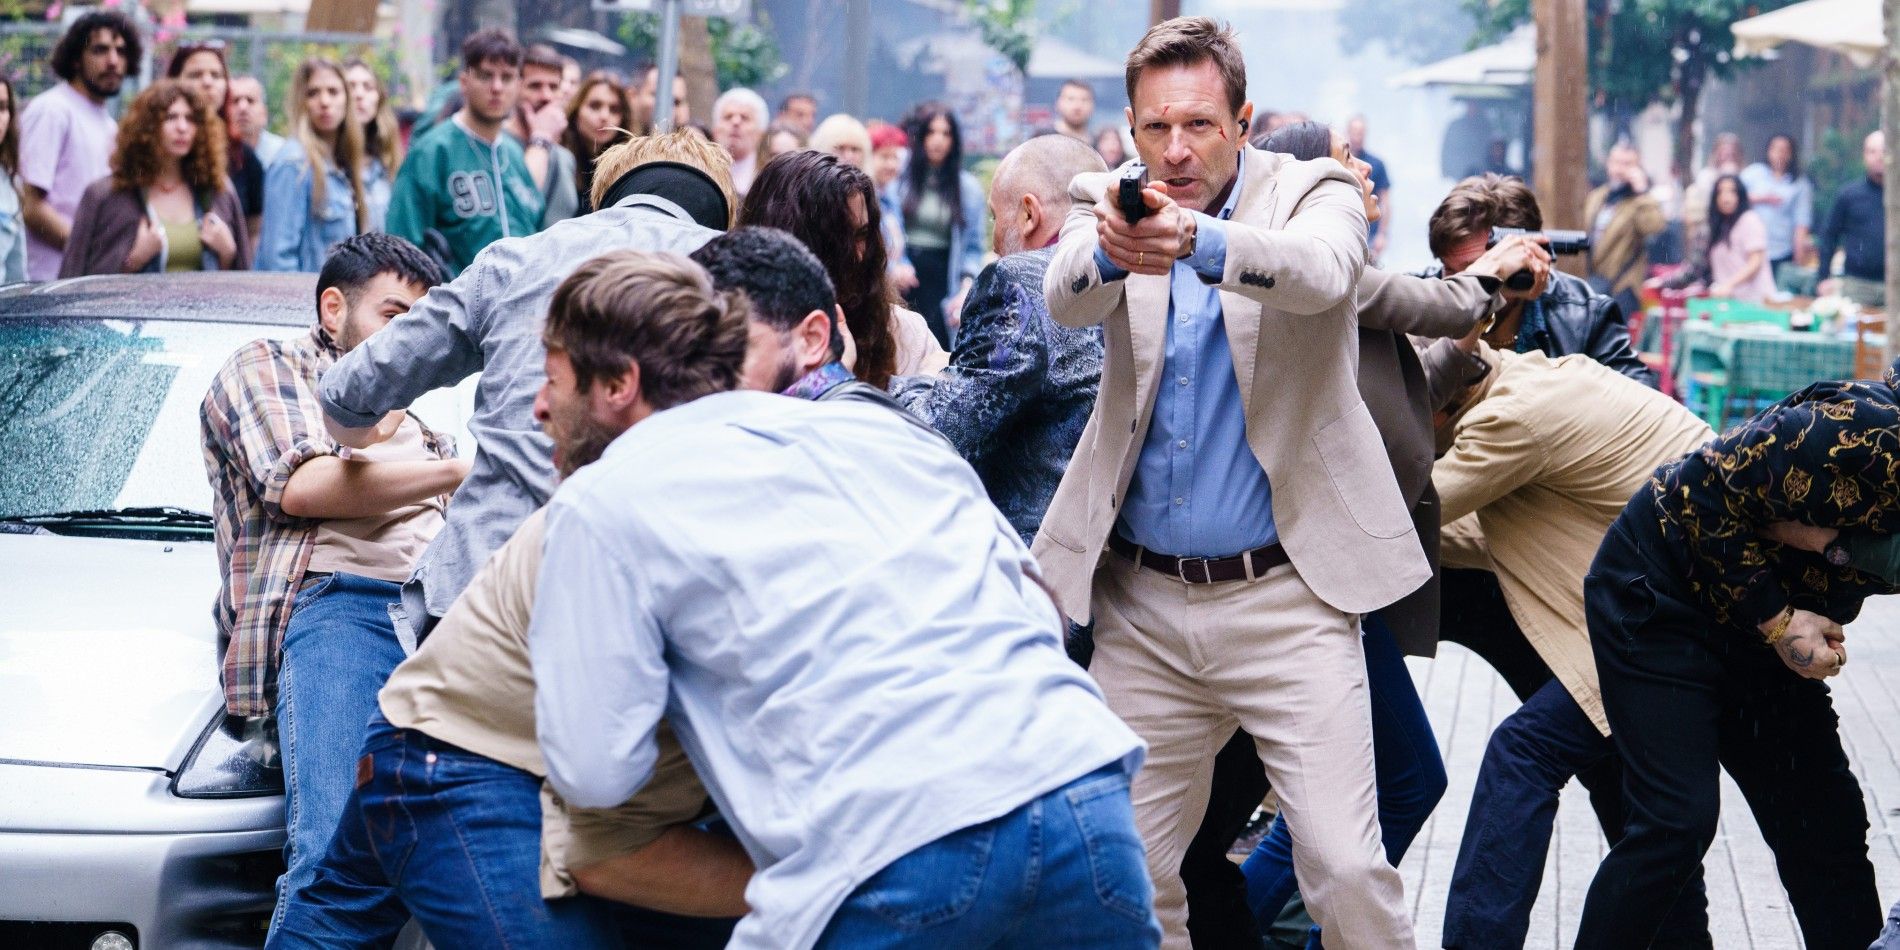 Aaron Eckhart pointing a gun in the middle of a chaotic crowd in The Bricklayer